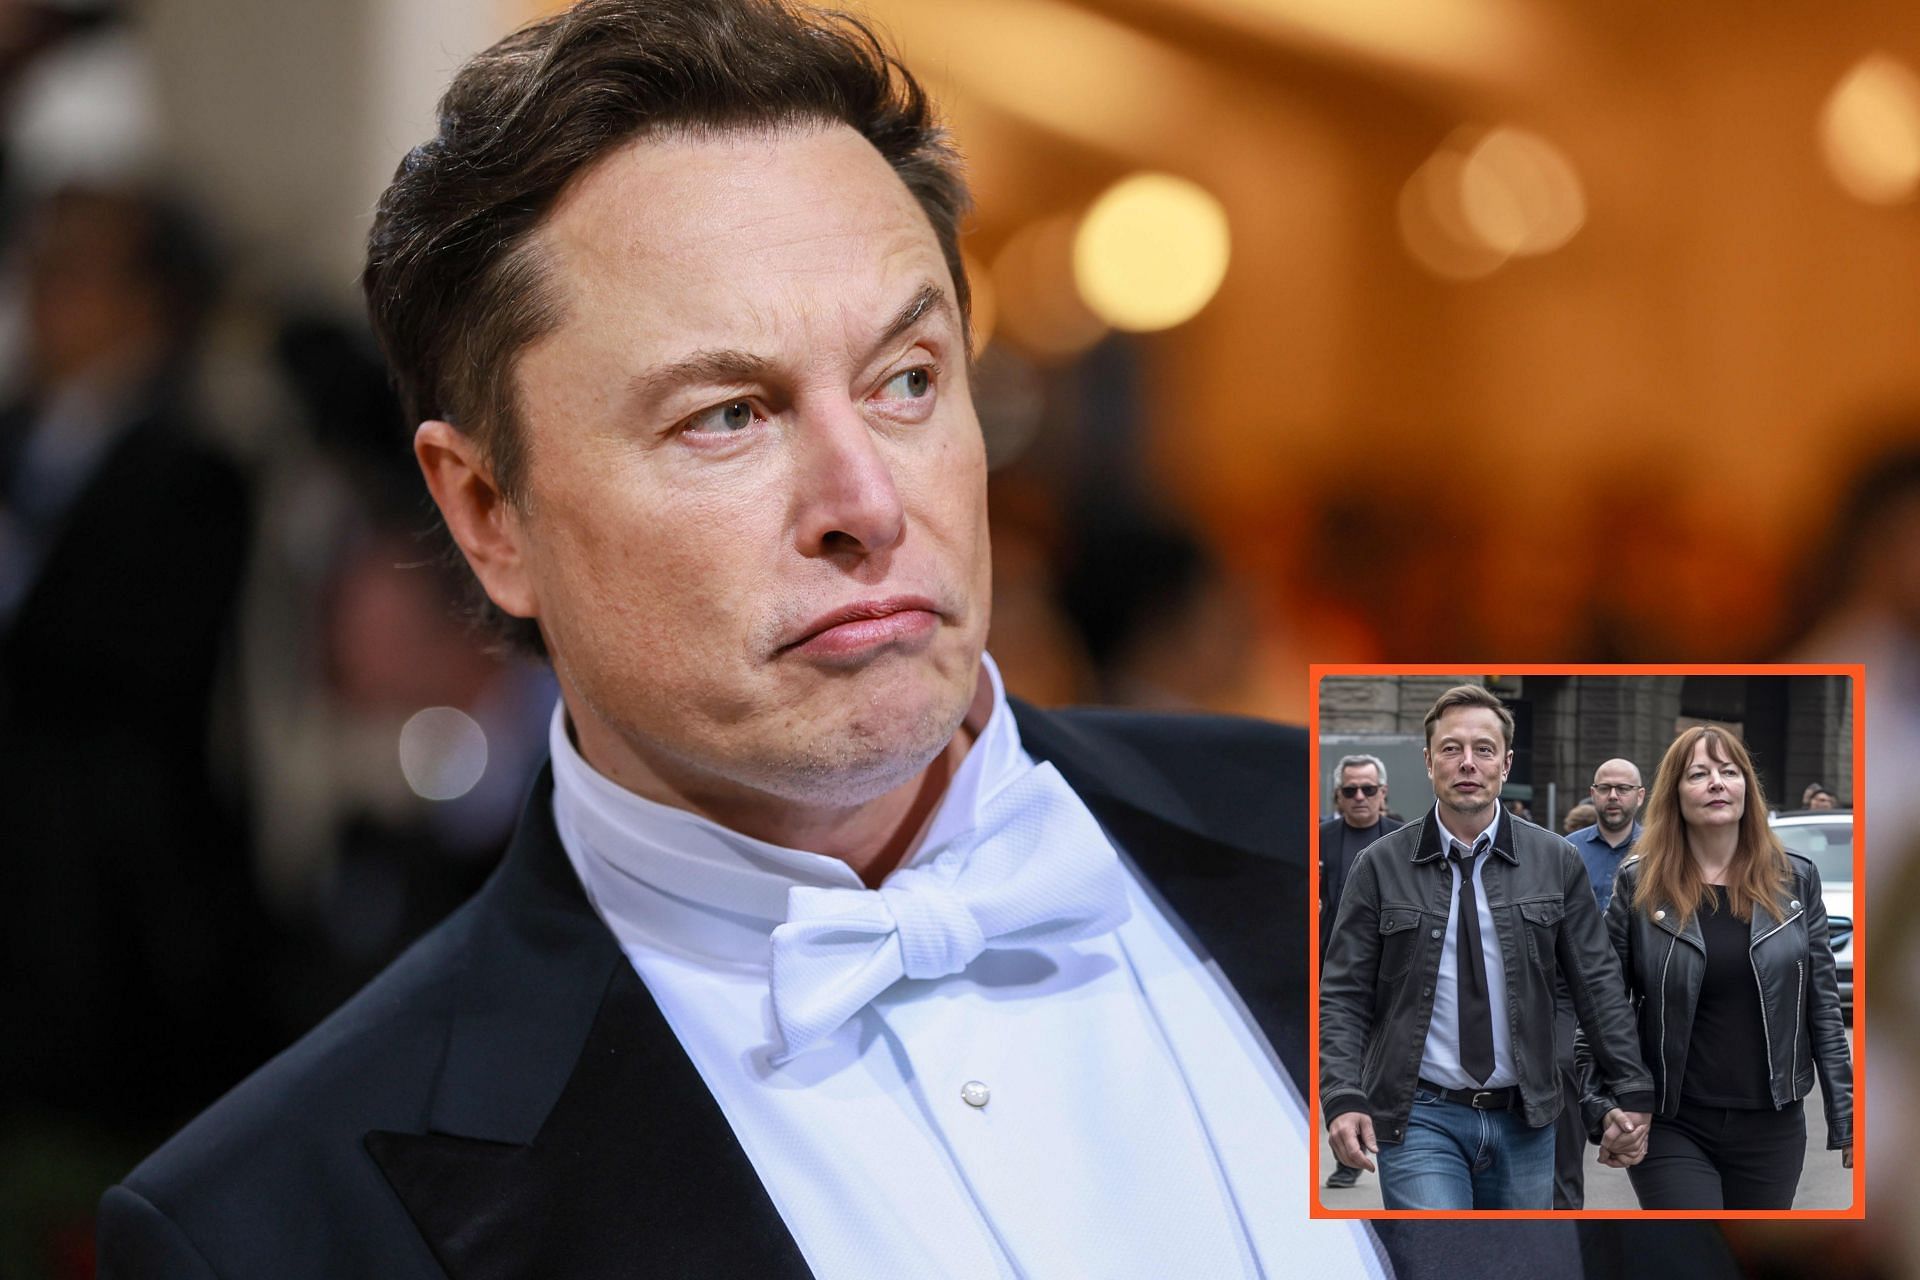 Elon Musk is not dating Mary Barra (Image via Theo Wargo / Wireimage / Getty Images &amp; Twitter / @blovereviews)